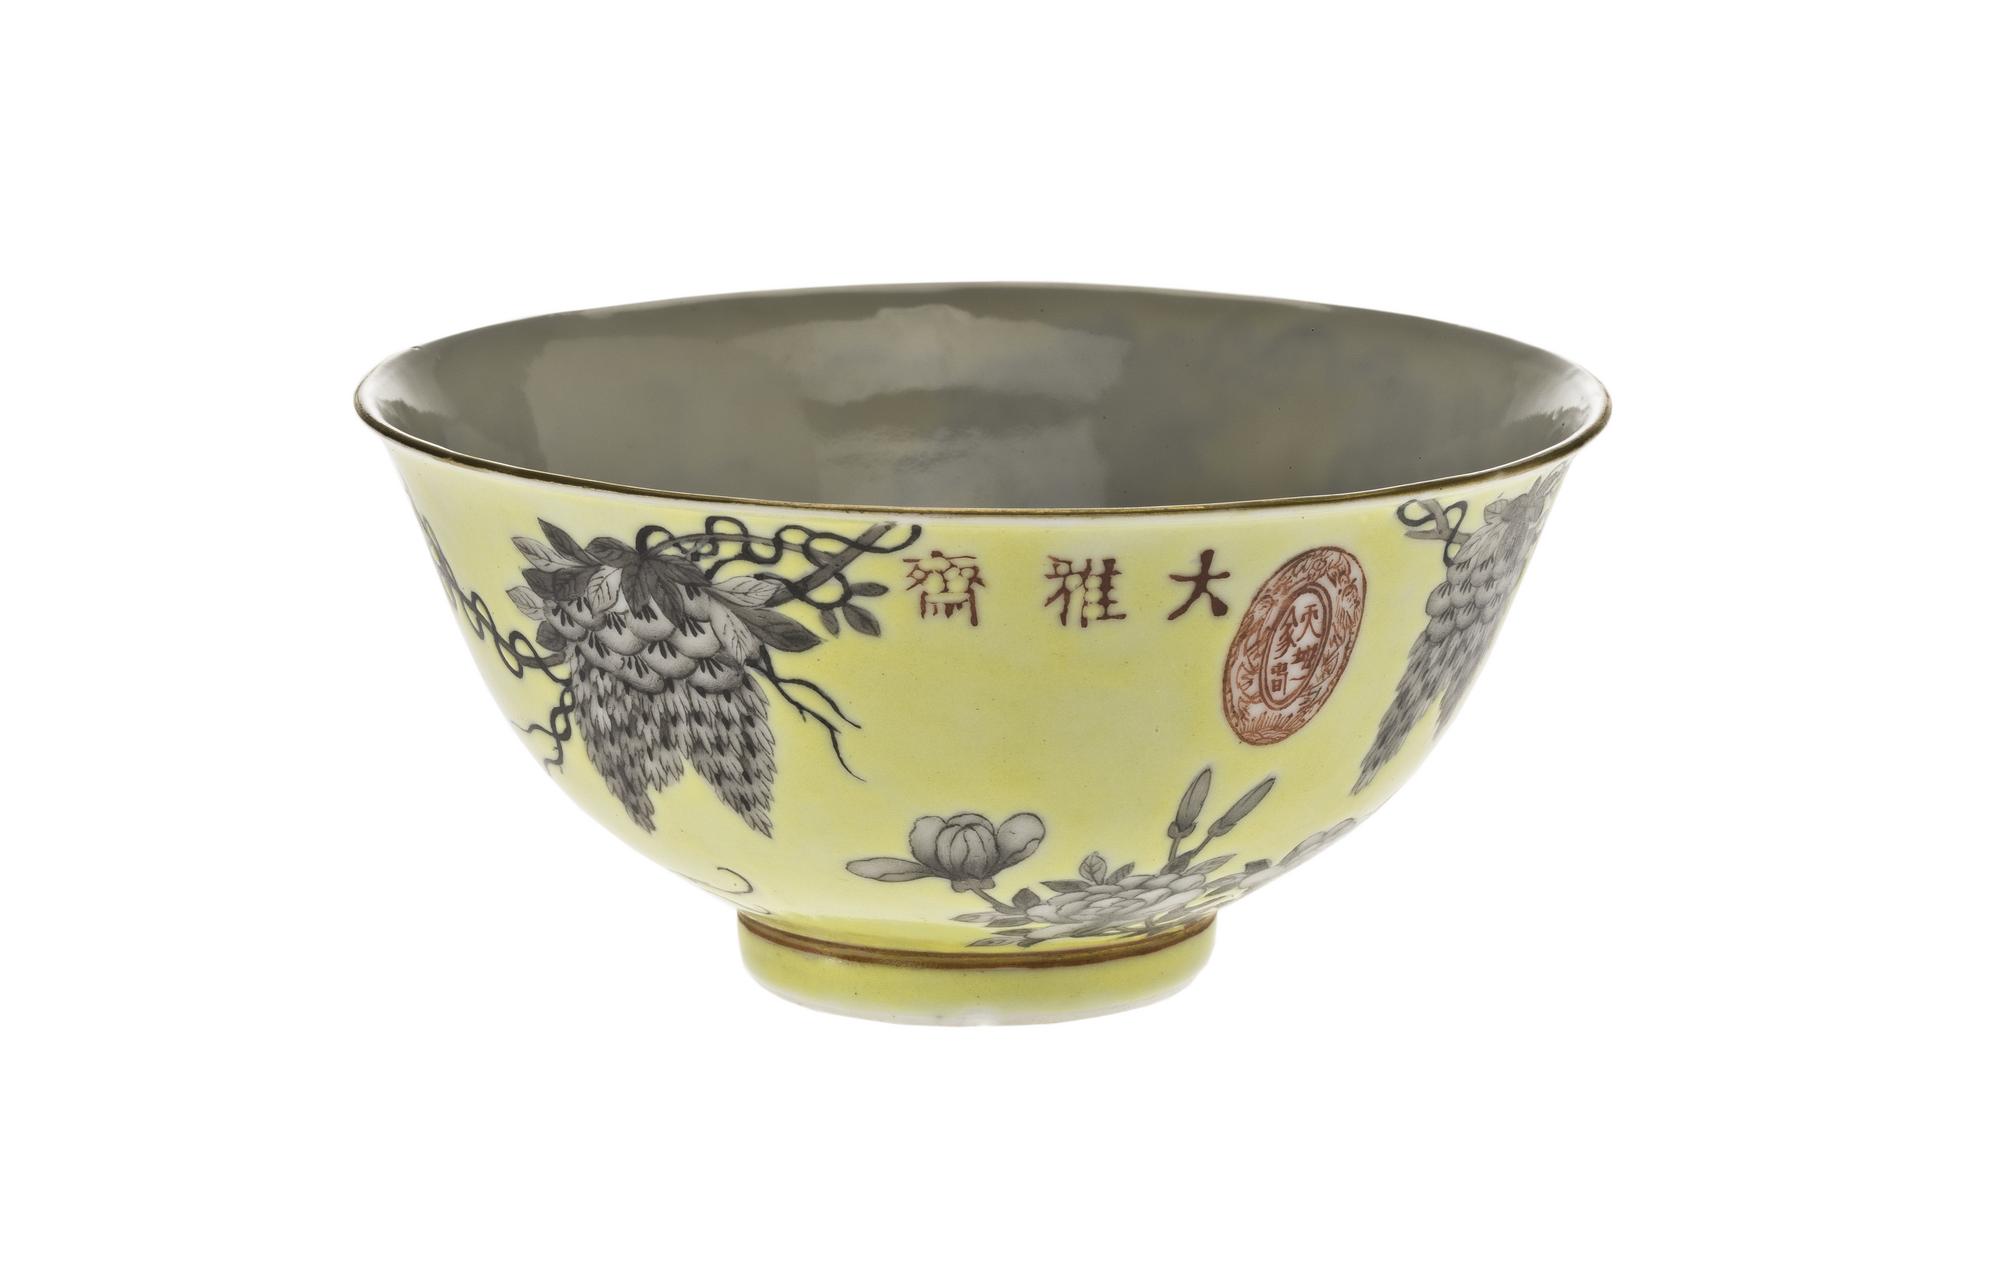 Porcelain bowl decorated in overglaze enamels with a yellow ground and grisaille design of wisteria, peony and a bird, with inscription and marks, part of a porcelain group made in celebration of the 60th birthday of the Empress Dowager Cixi: China, Jiangxi Province, Jingdezhen kilns, Qing Dynasty, Guangxu reign, 1894 AD.